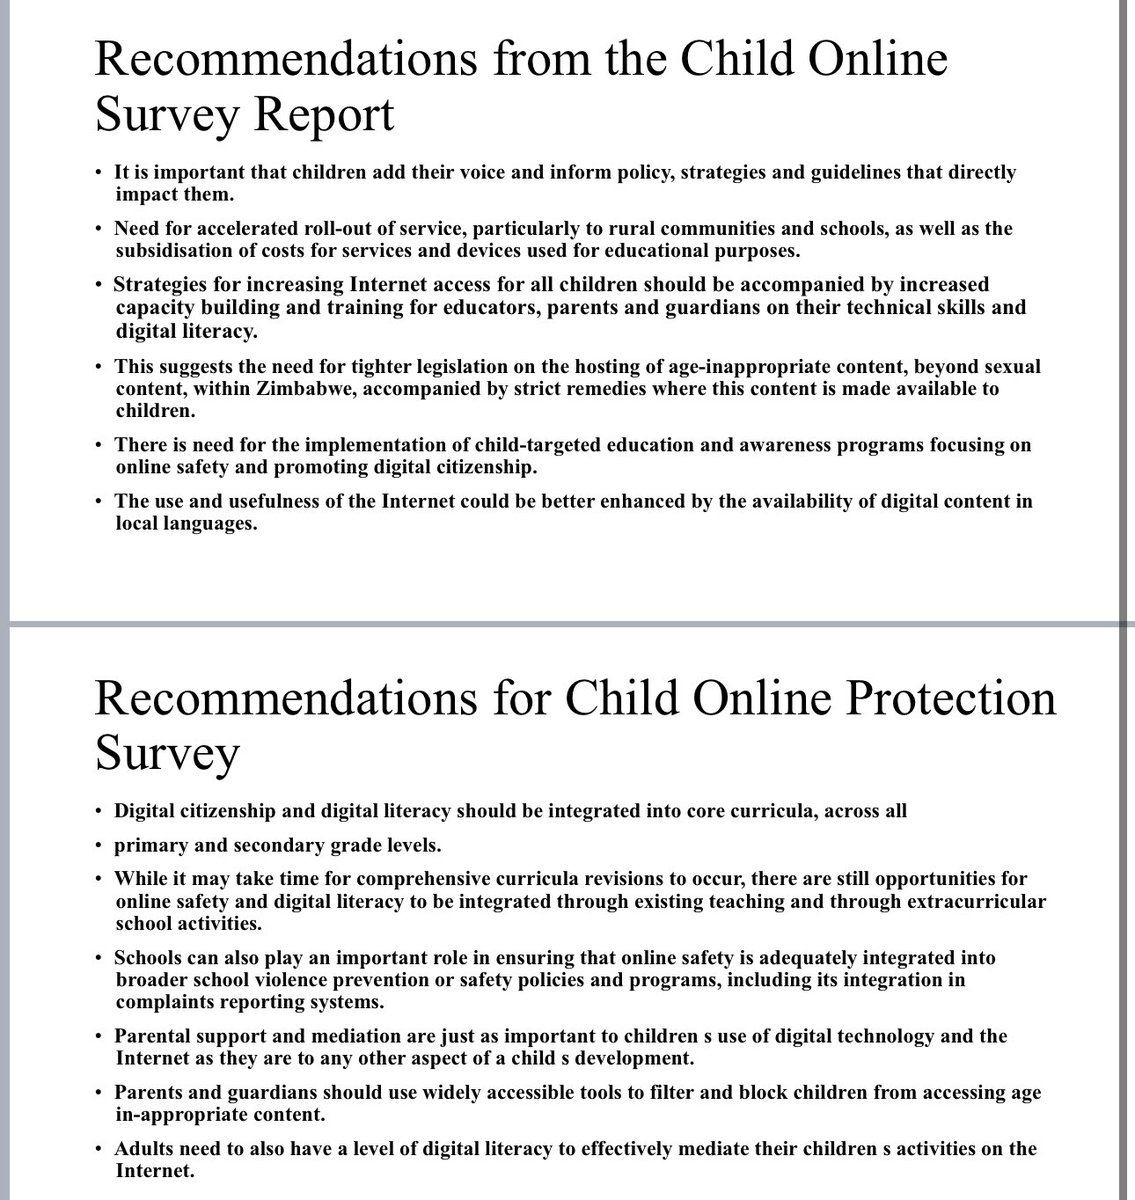 Recommendations from the Child Online Protection Survey